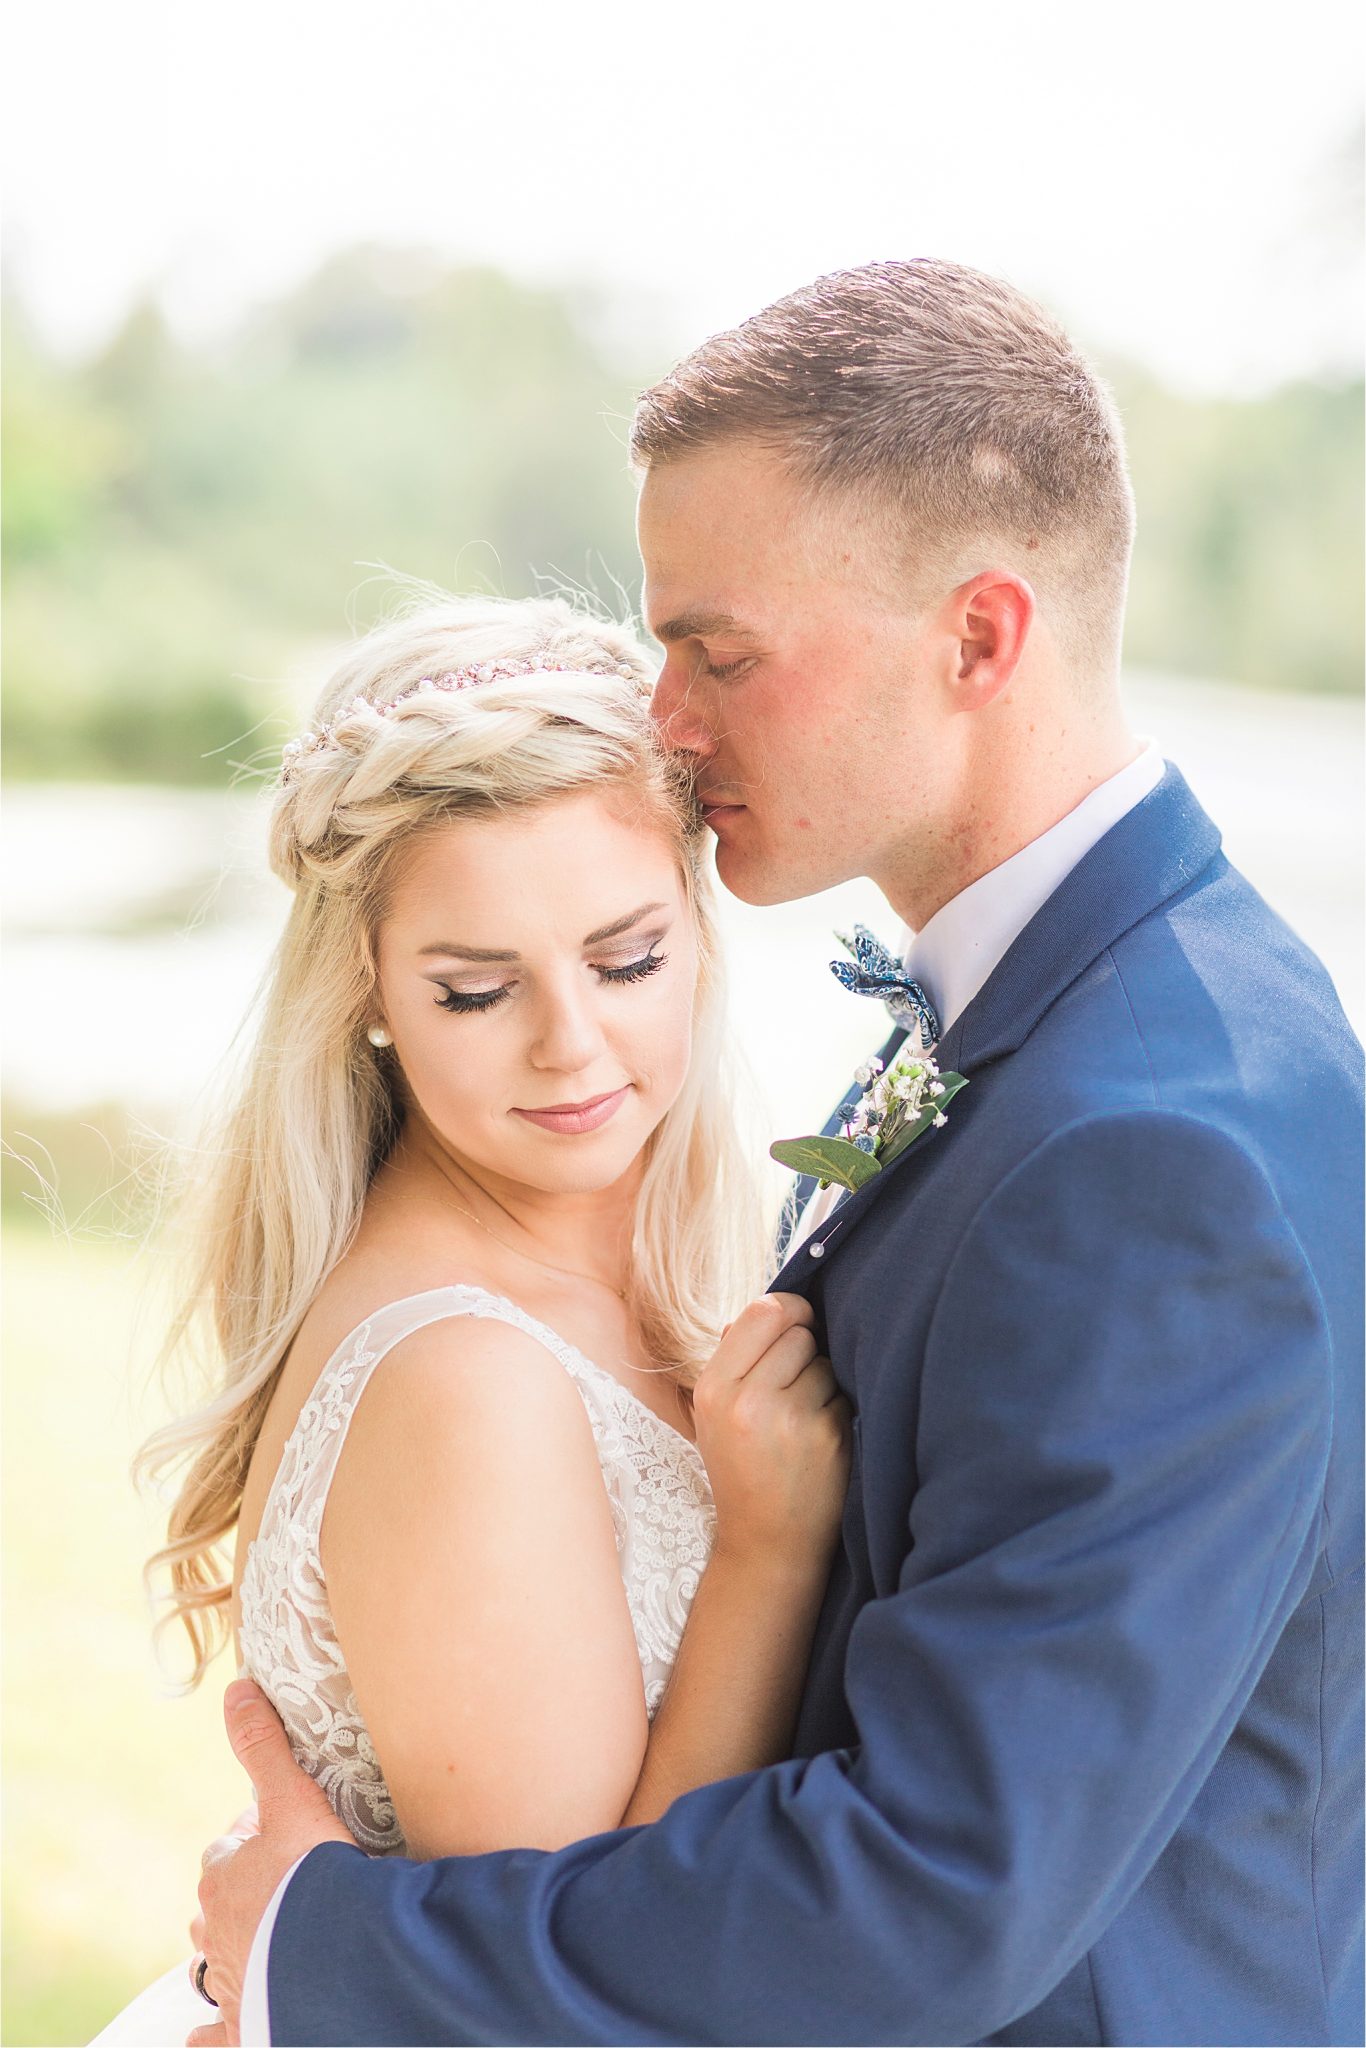 bridal-groom-portraits-photos-blue-suit-bow-tie-first-look-precious-moments